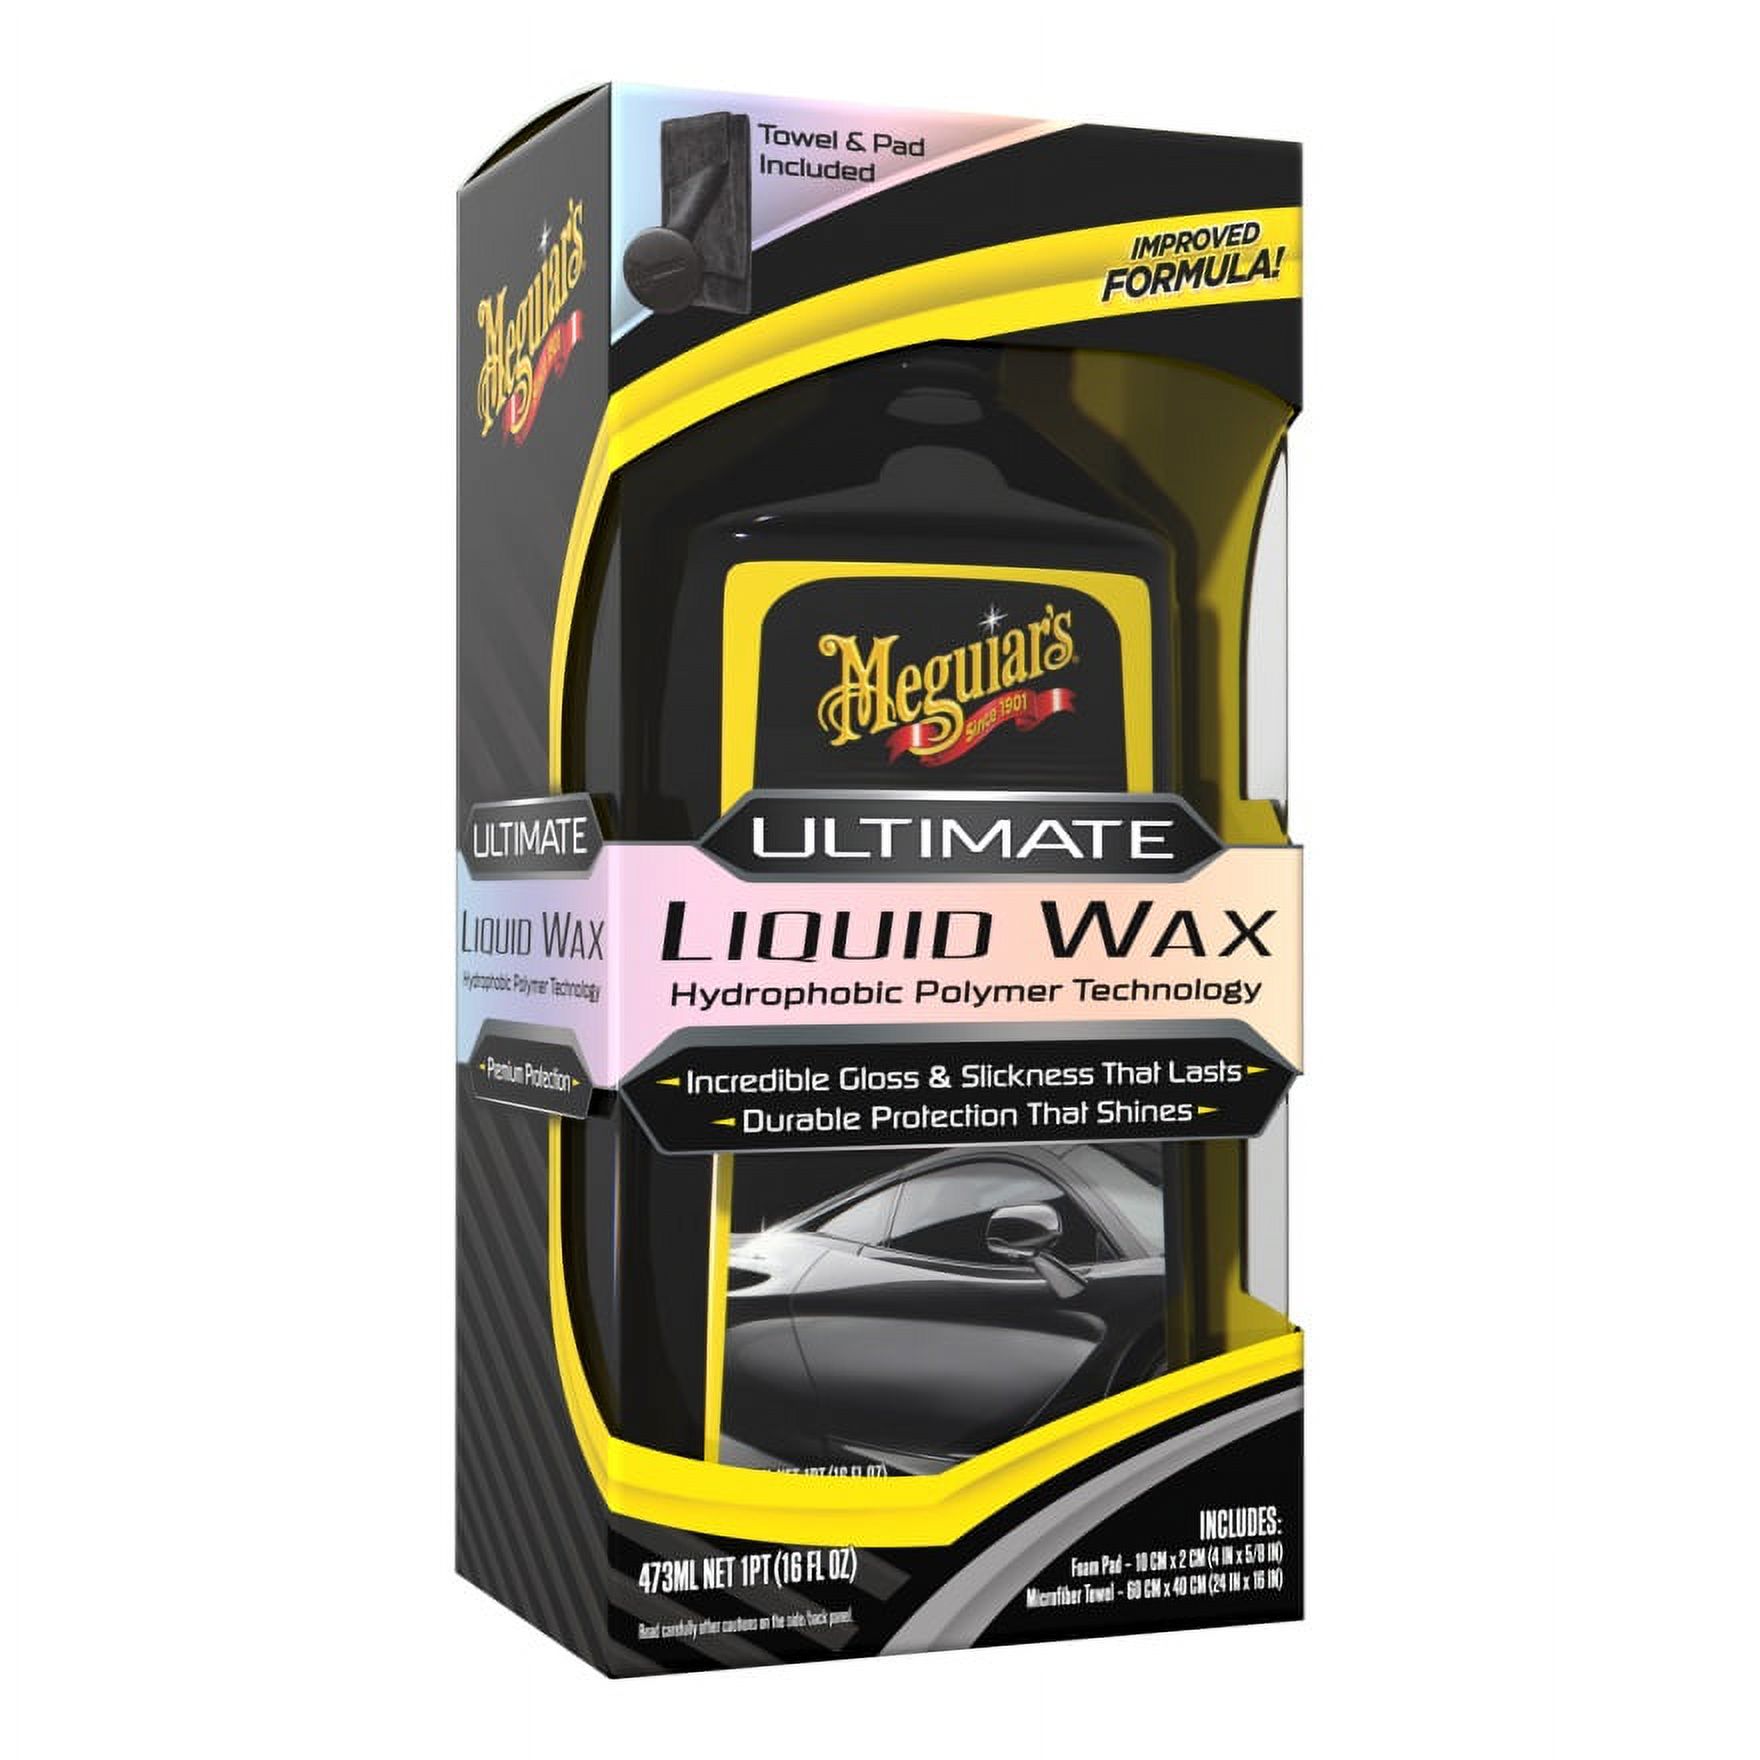 Meguiar's Ultimate Liquid Wax Long-Lasting Easy to Use Synthetic Wax, G210516, 16 oz - image 1 of 3